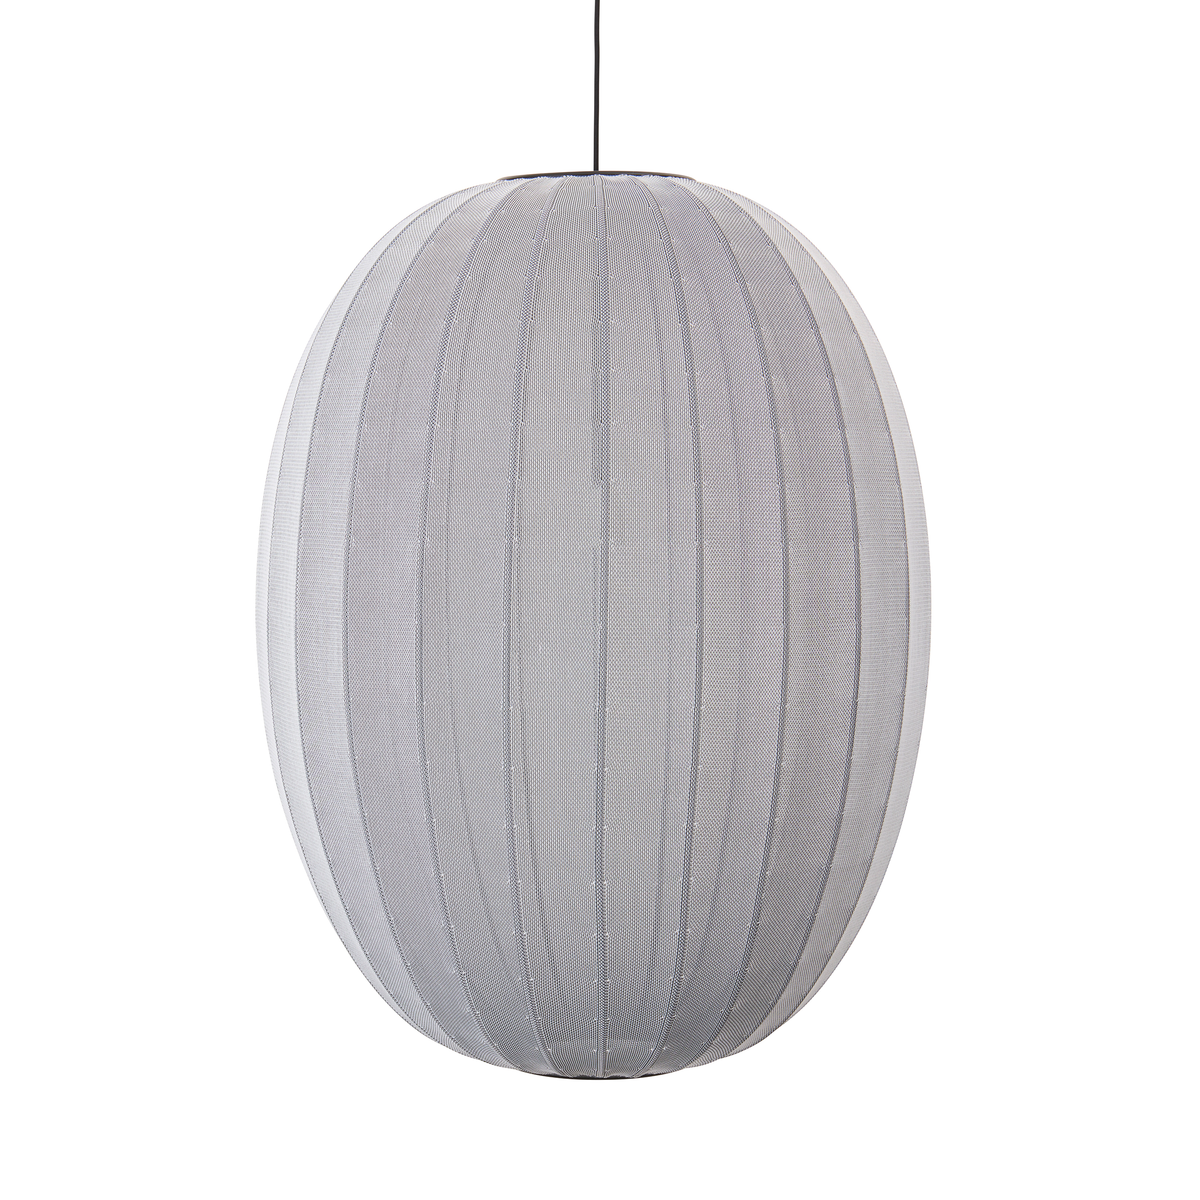 Made by Hand, Knit-Wit Pendant Lamp 65, Pearl White, Pendant,